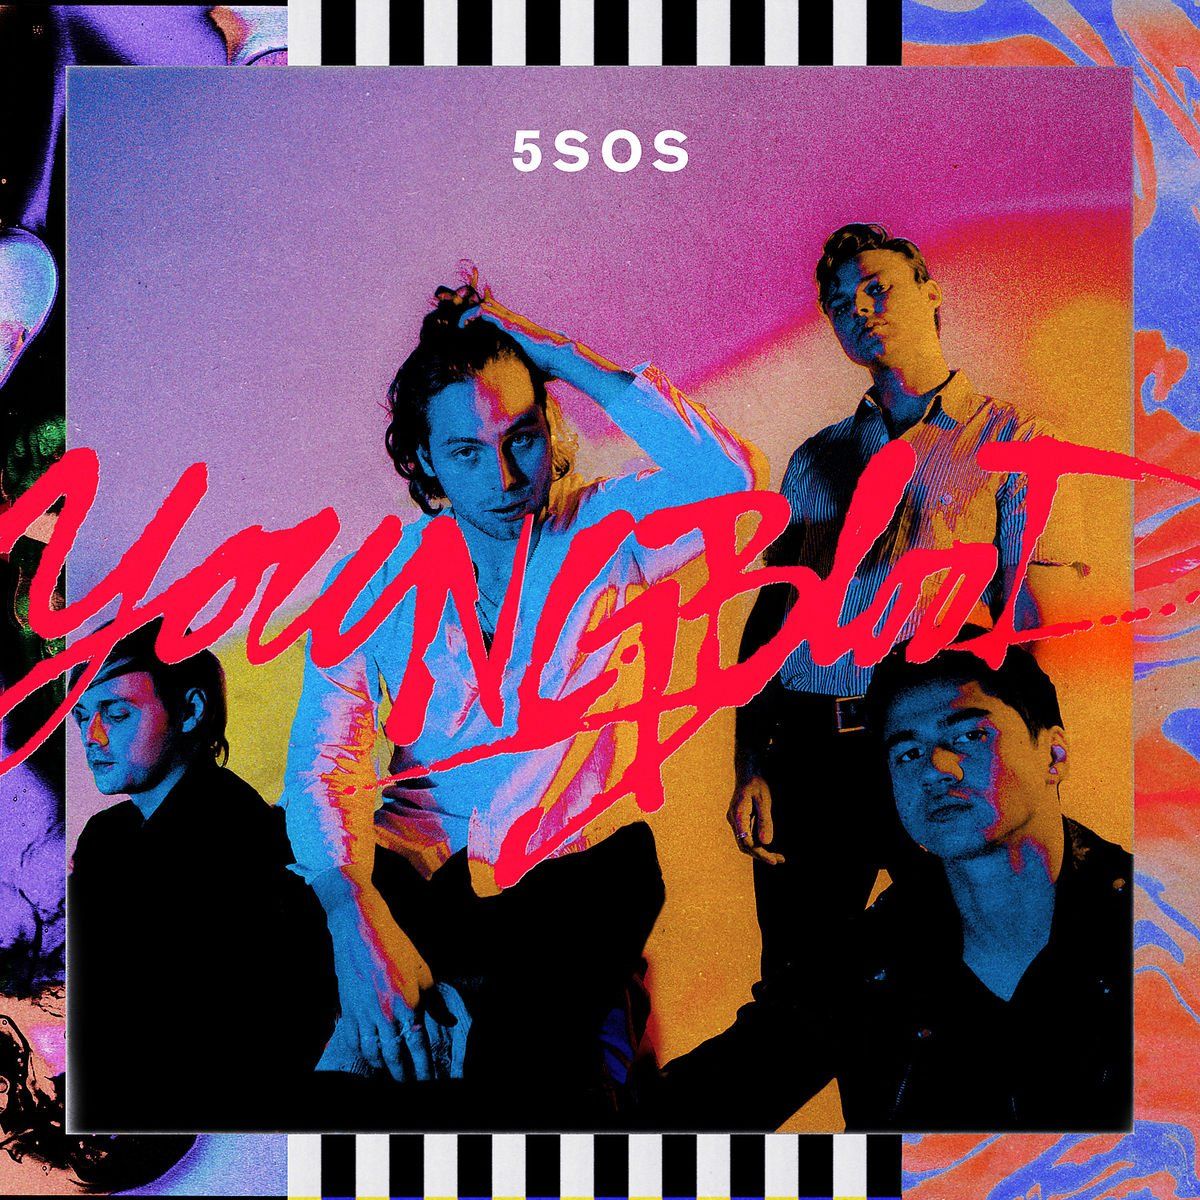 Youngblood Deluxe